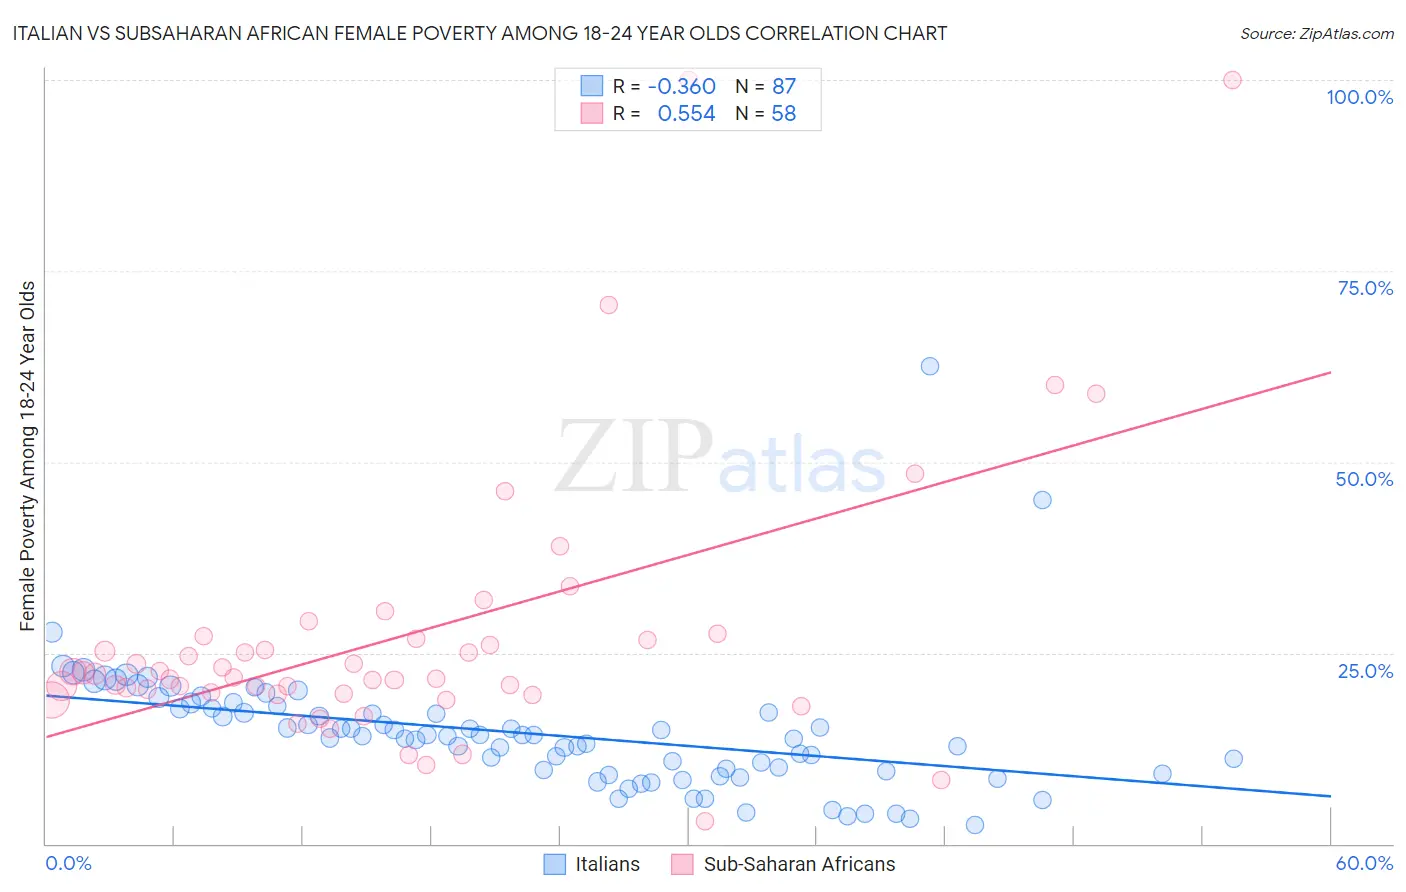 Italian vs Subsaharan African Female Poverty Among 18-24 Year Olds